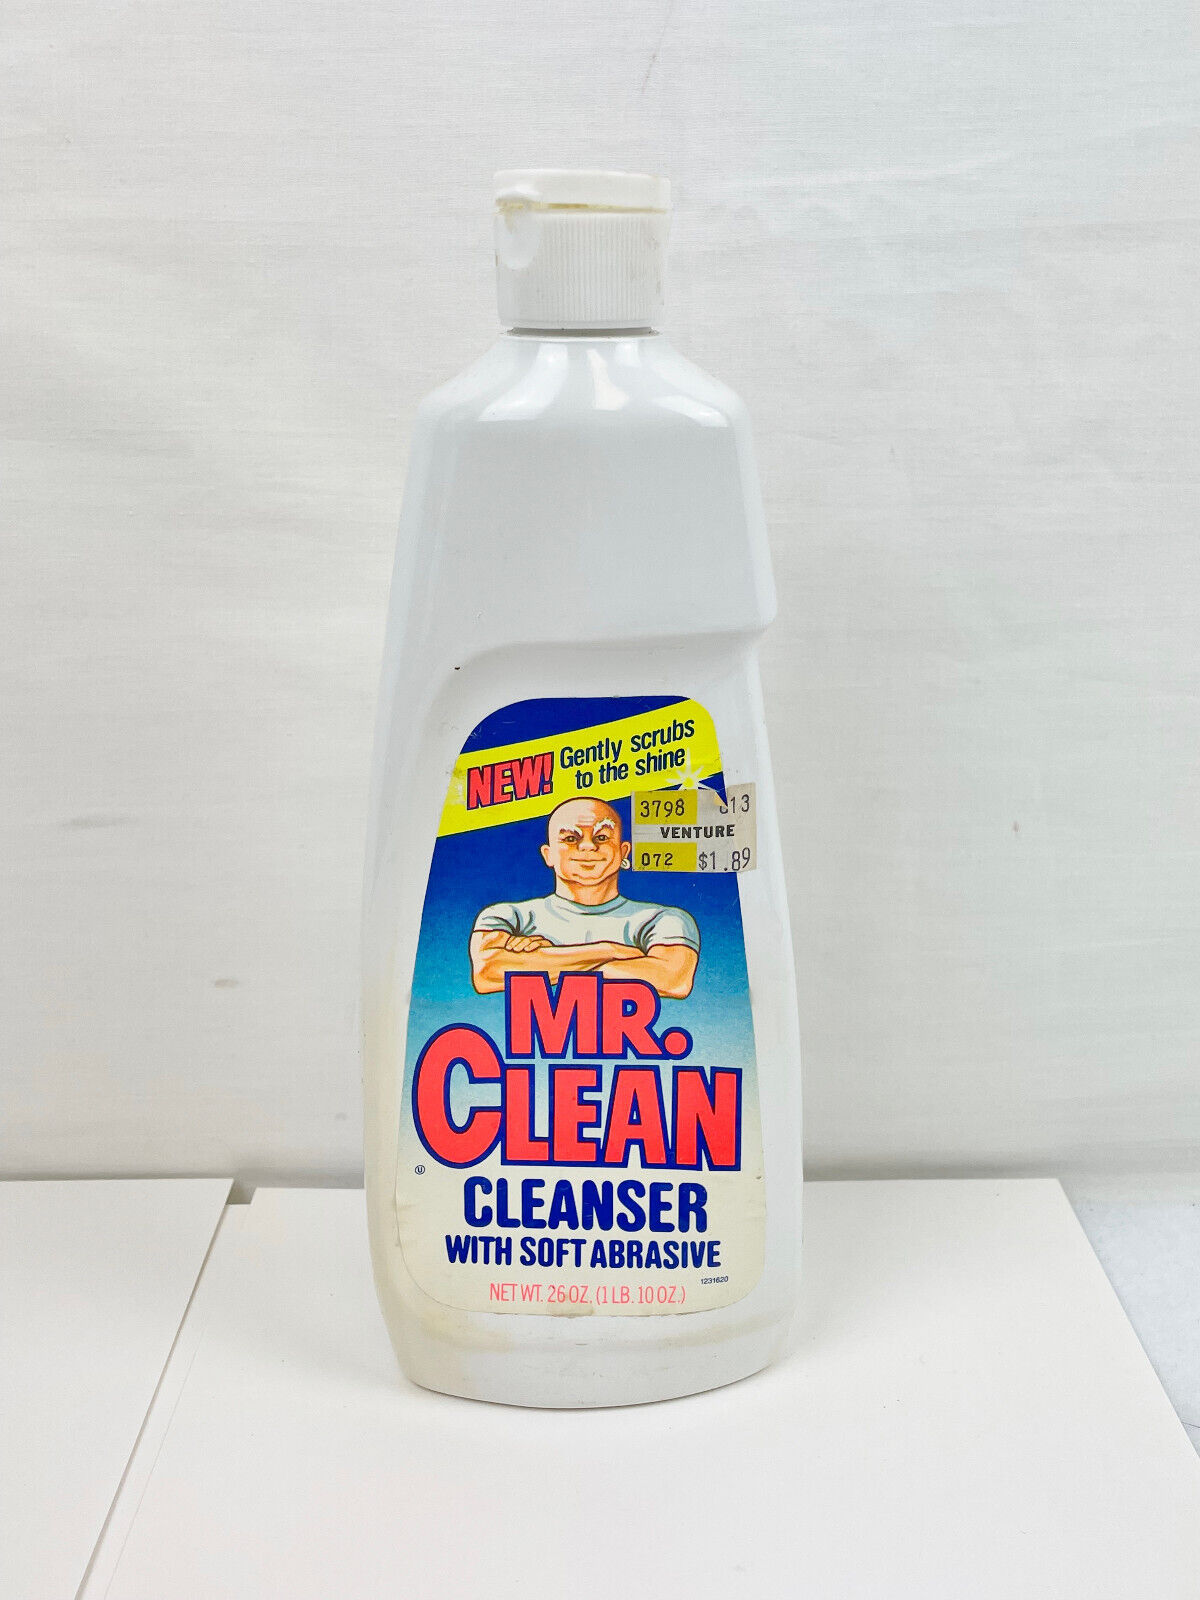 VINTAGE 1985 MR. CLEAN CLEANSER WITH SOFT ABRASIVE - EMPTY - COLLECTORS ITEM 